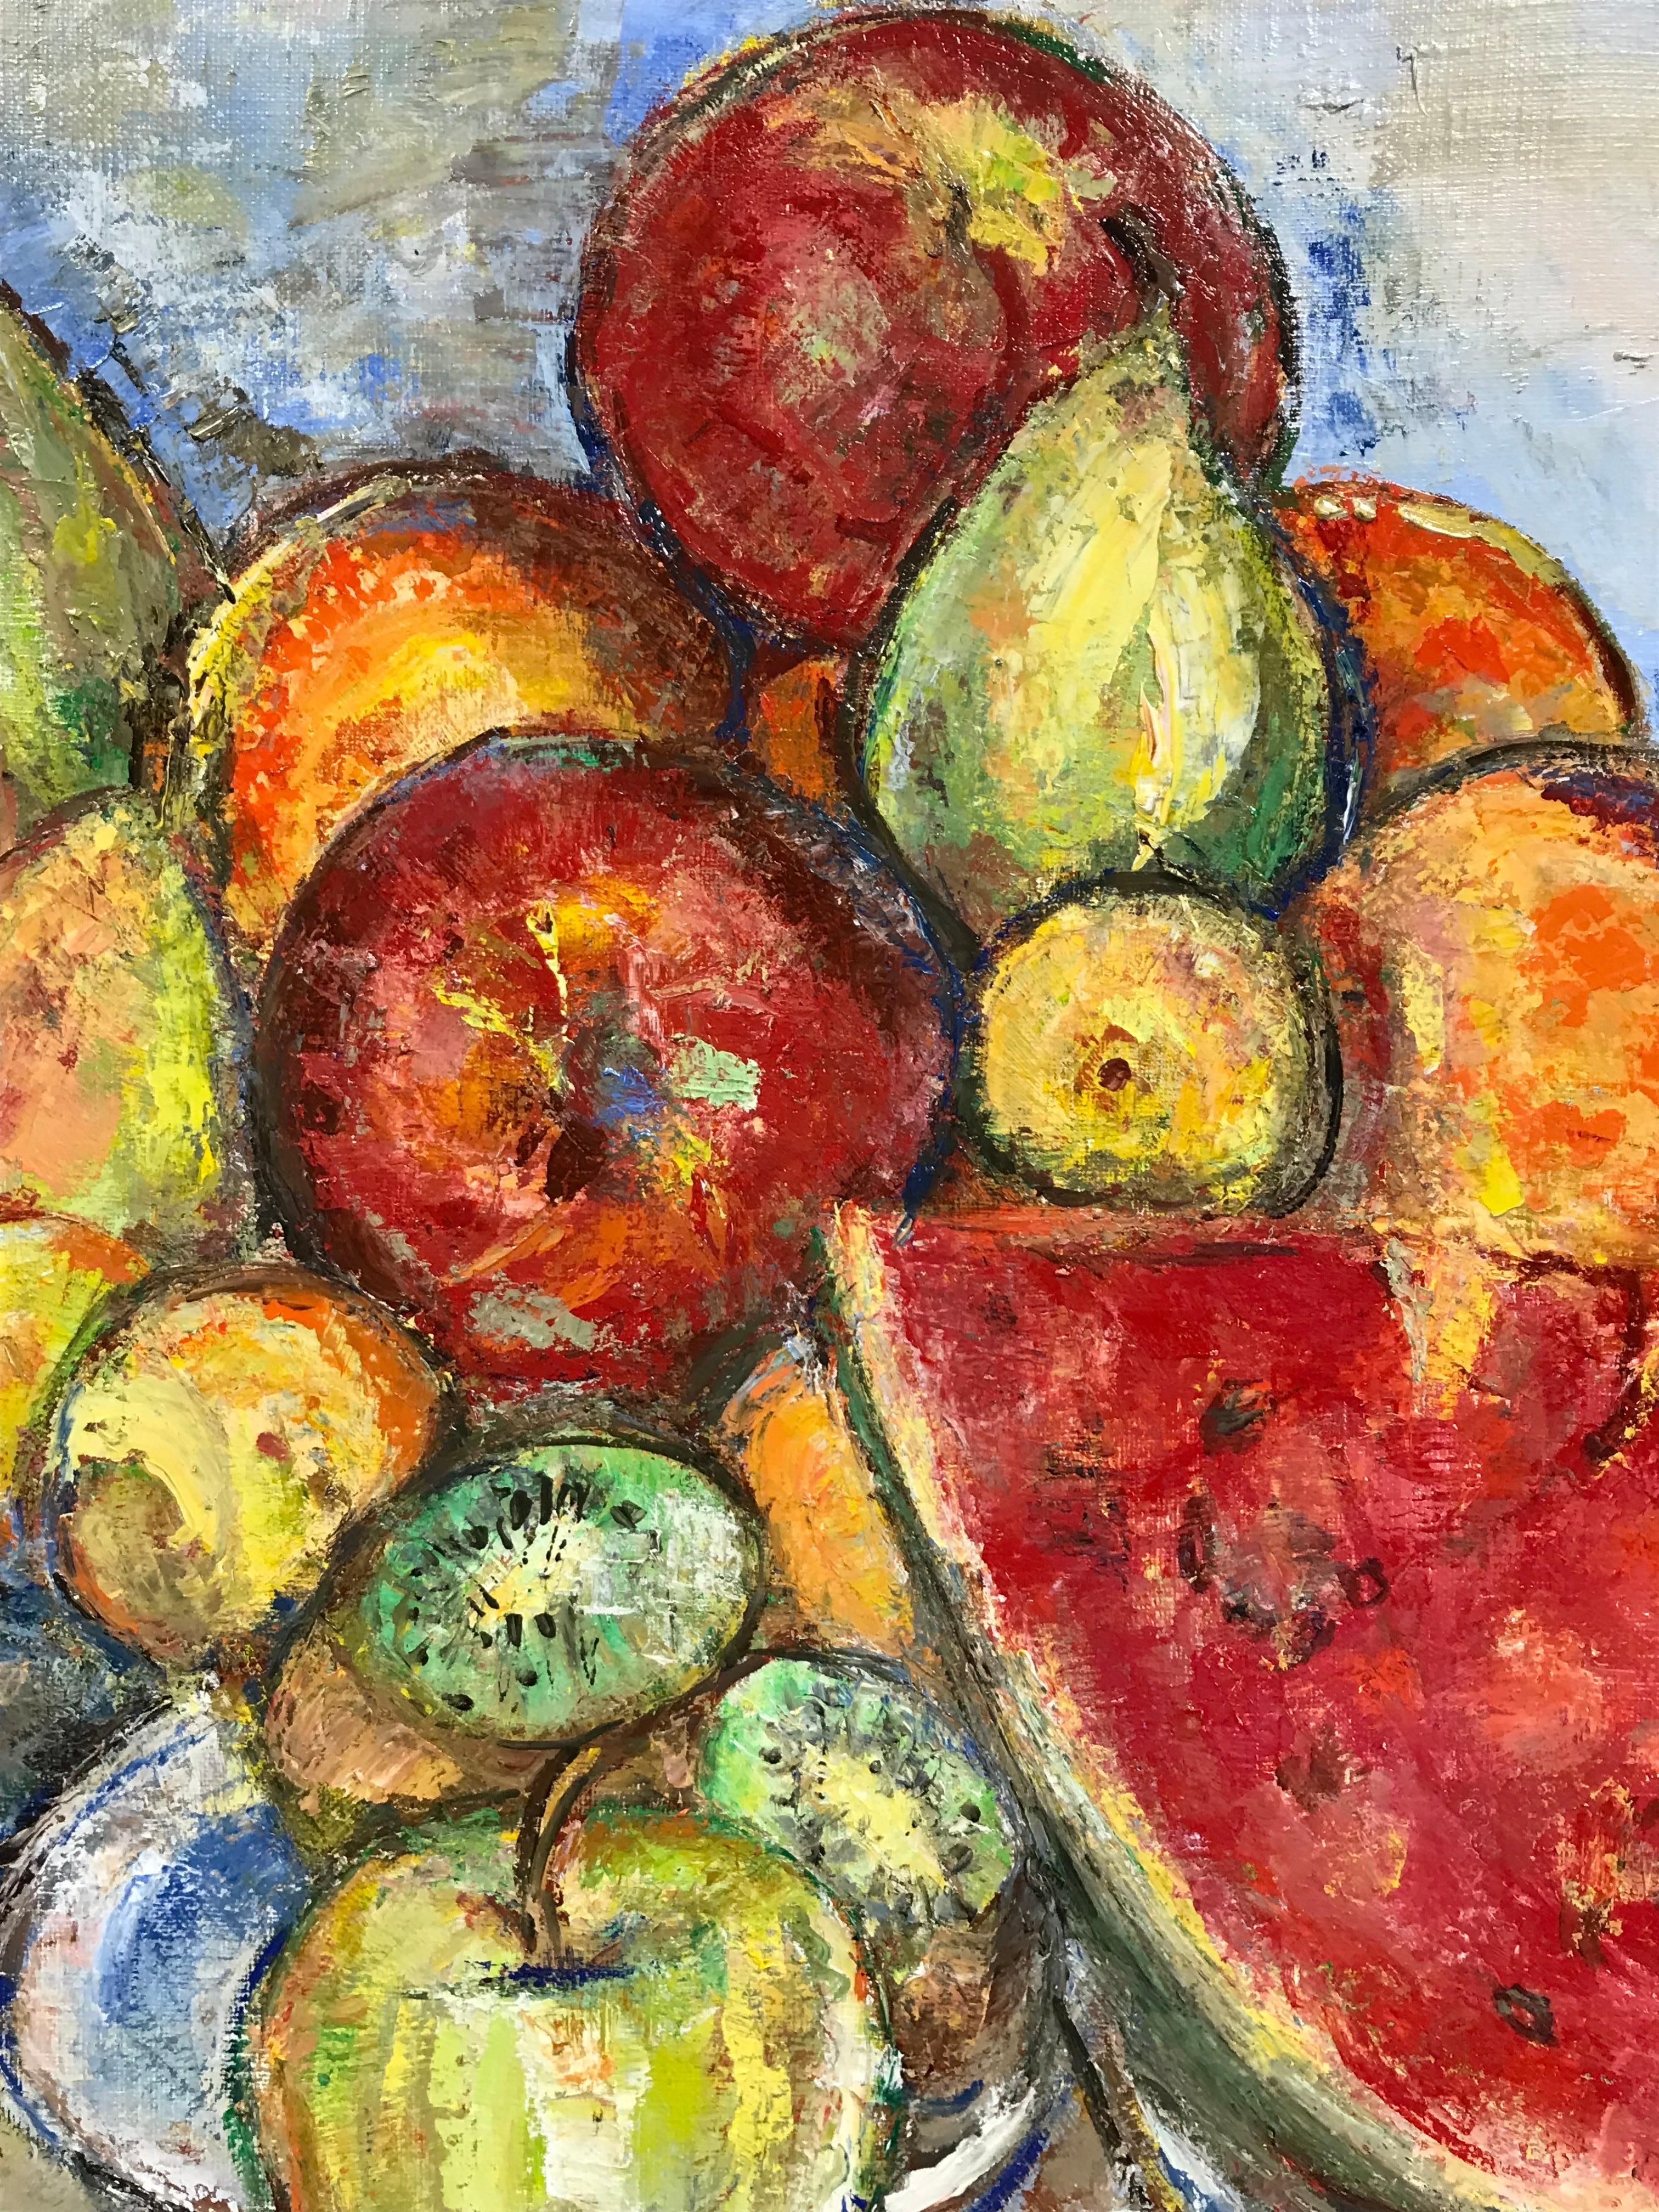 Signed Original Oil Painting - Luscious Still Life of Fruit with Watermelon - Brown Interior Painting by Maria Tort Xirau